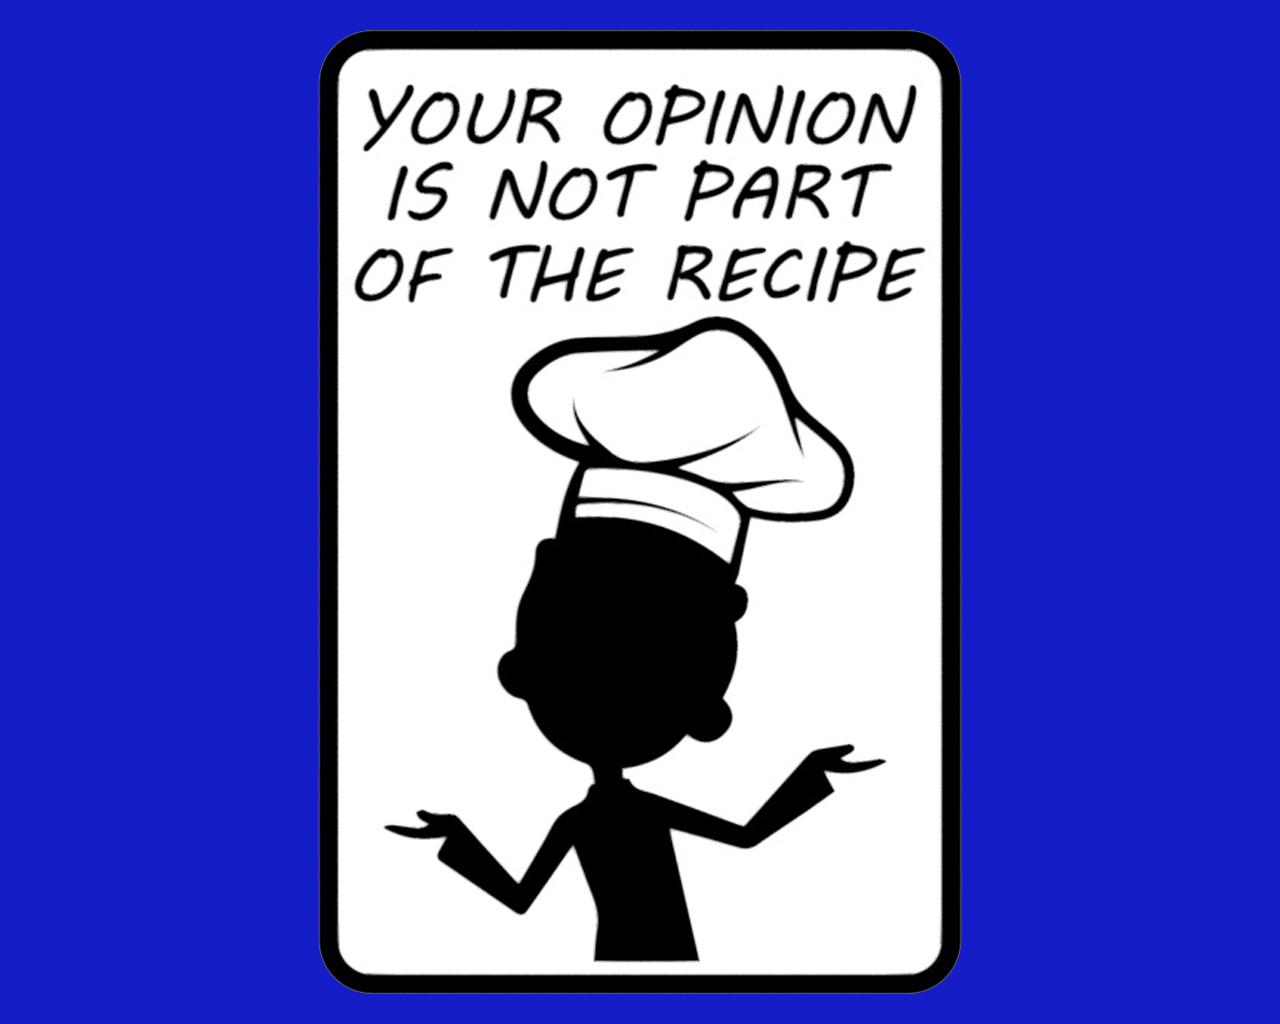 YOUR OPINION IS NOT PART OF THE RECIPE, sign